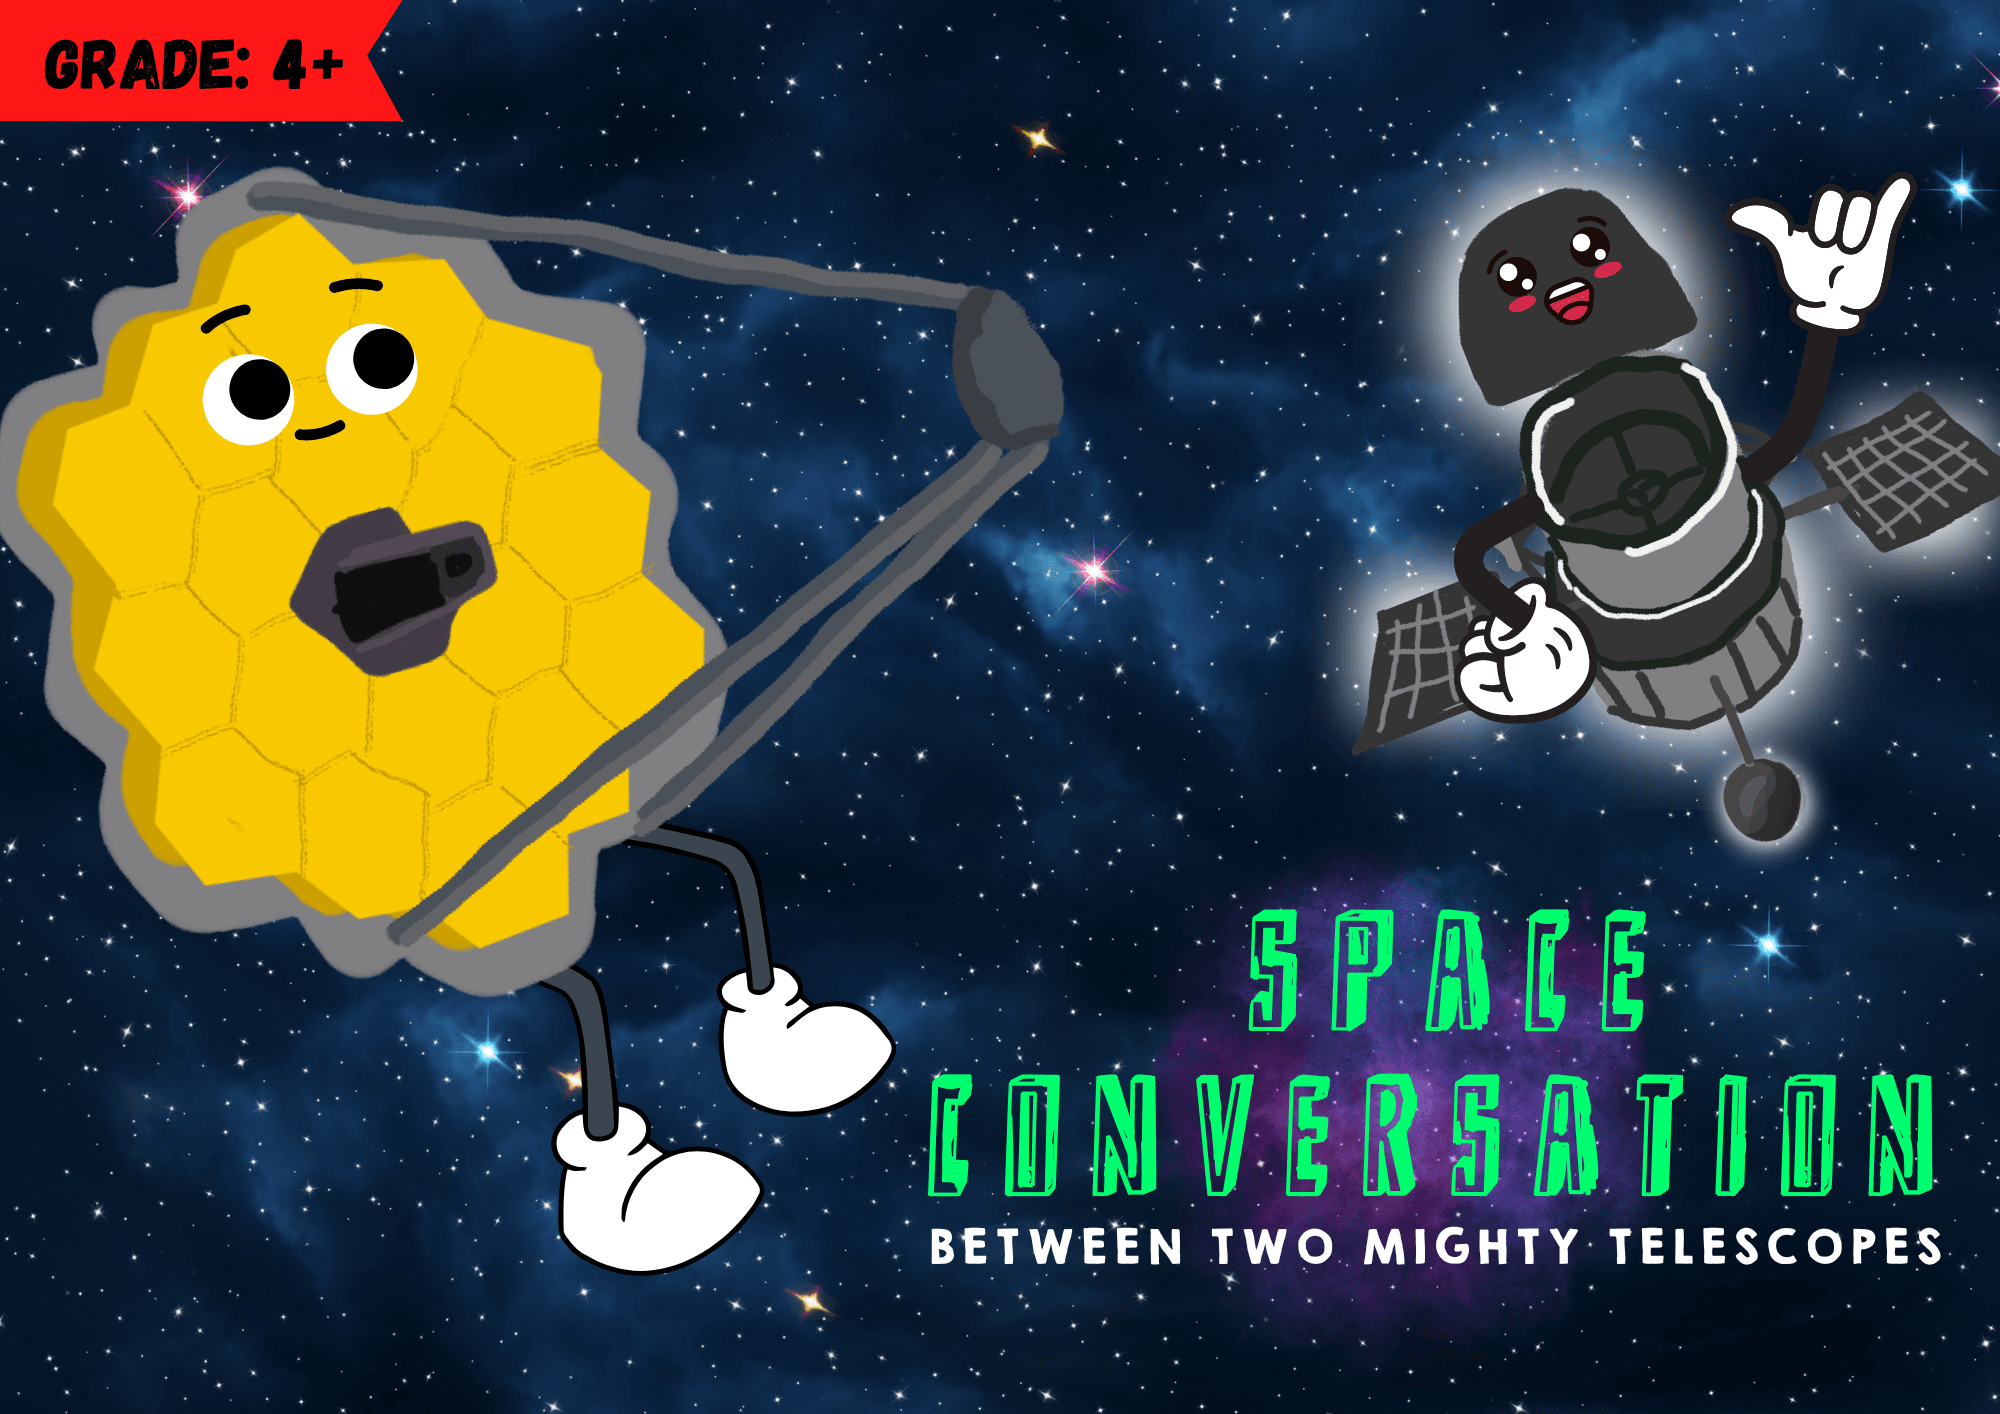 Space conversation between two mighty telescopes